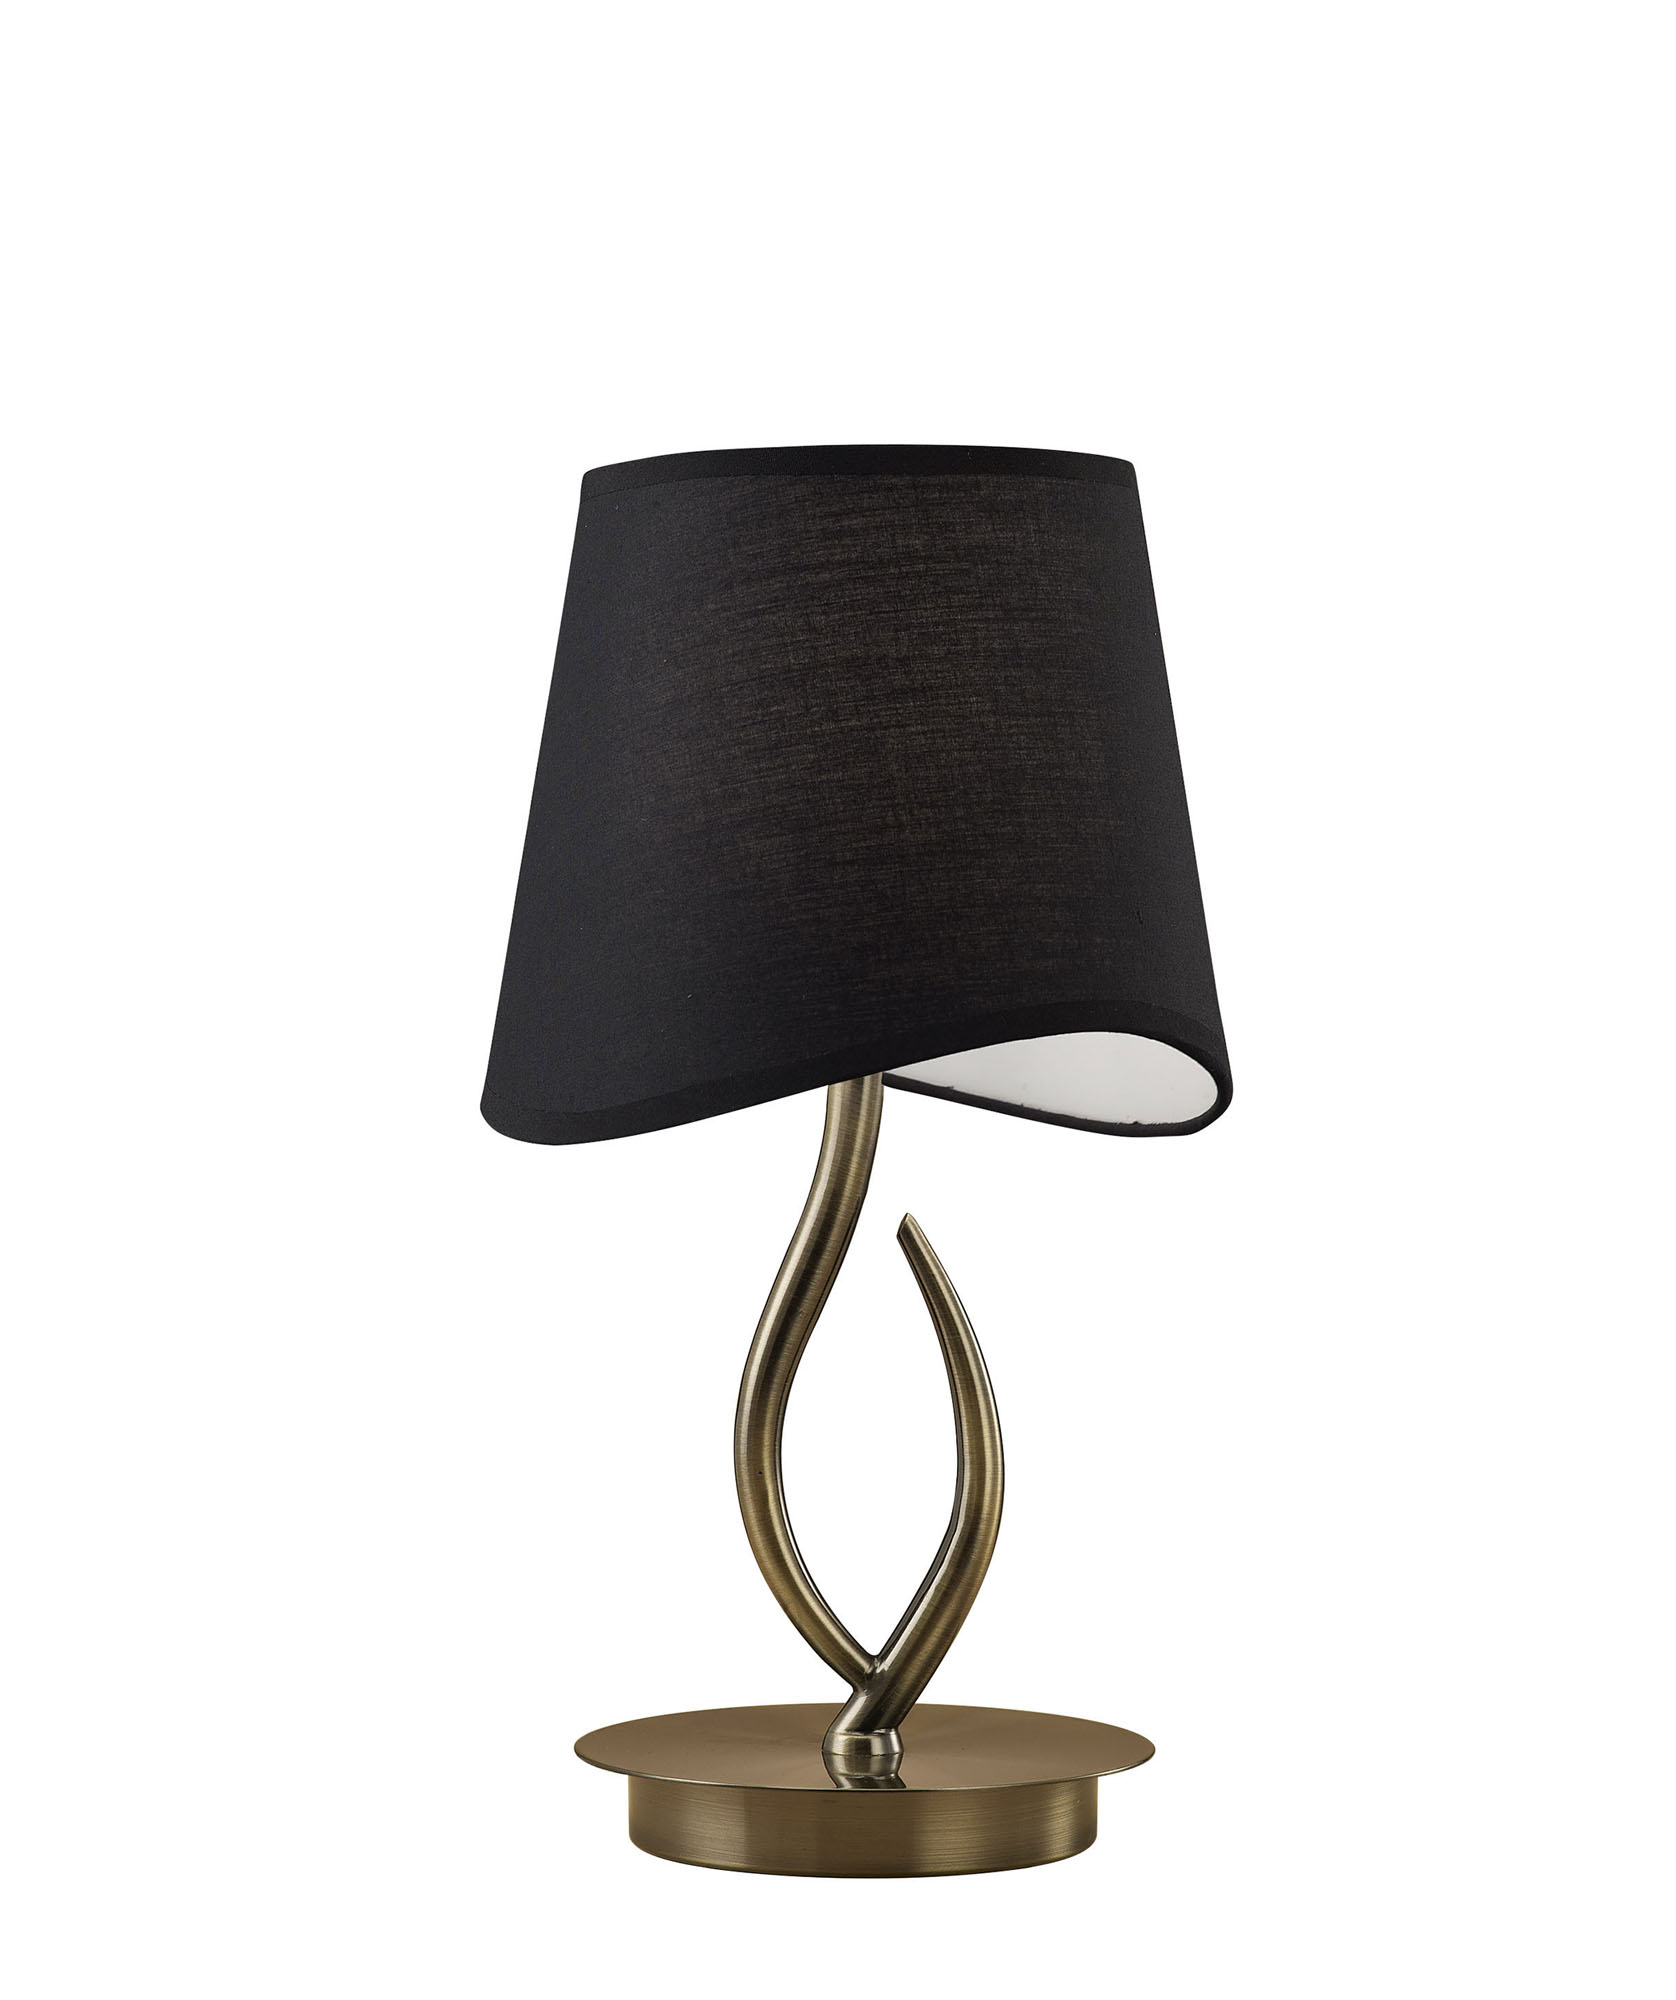 M1925/BS  ## Ninette Table Lamp 1 Light E14 Small; Antique Brass With Black Shade